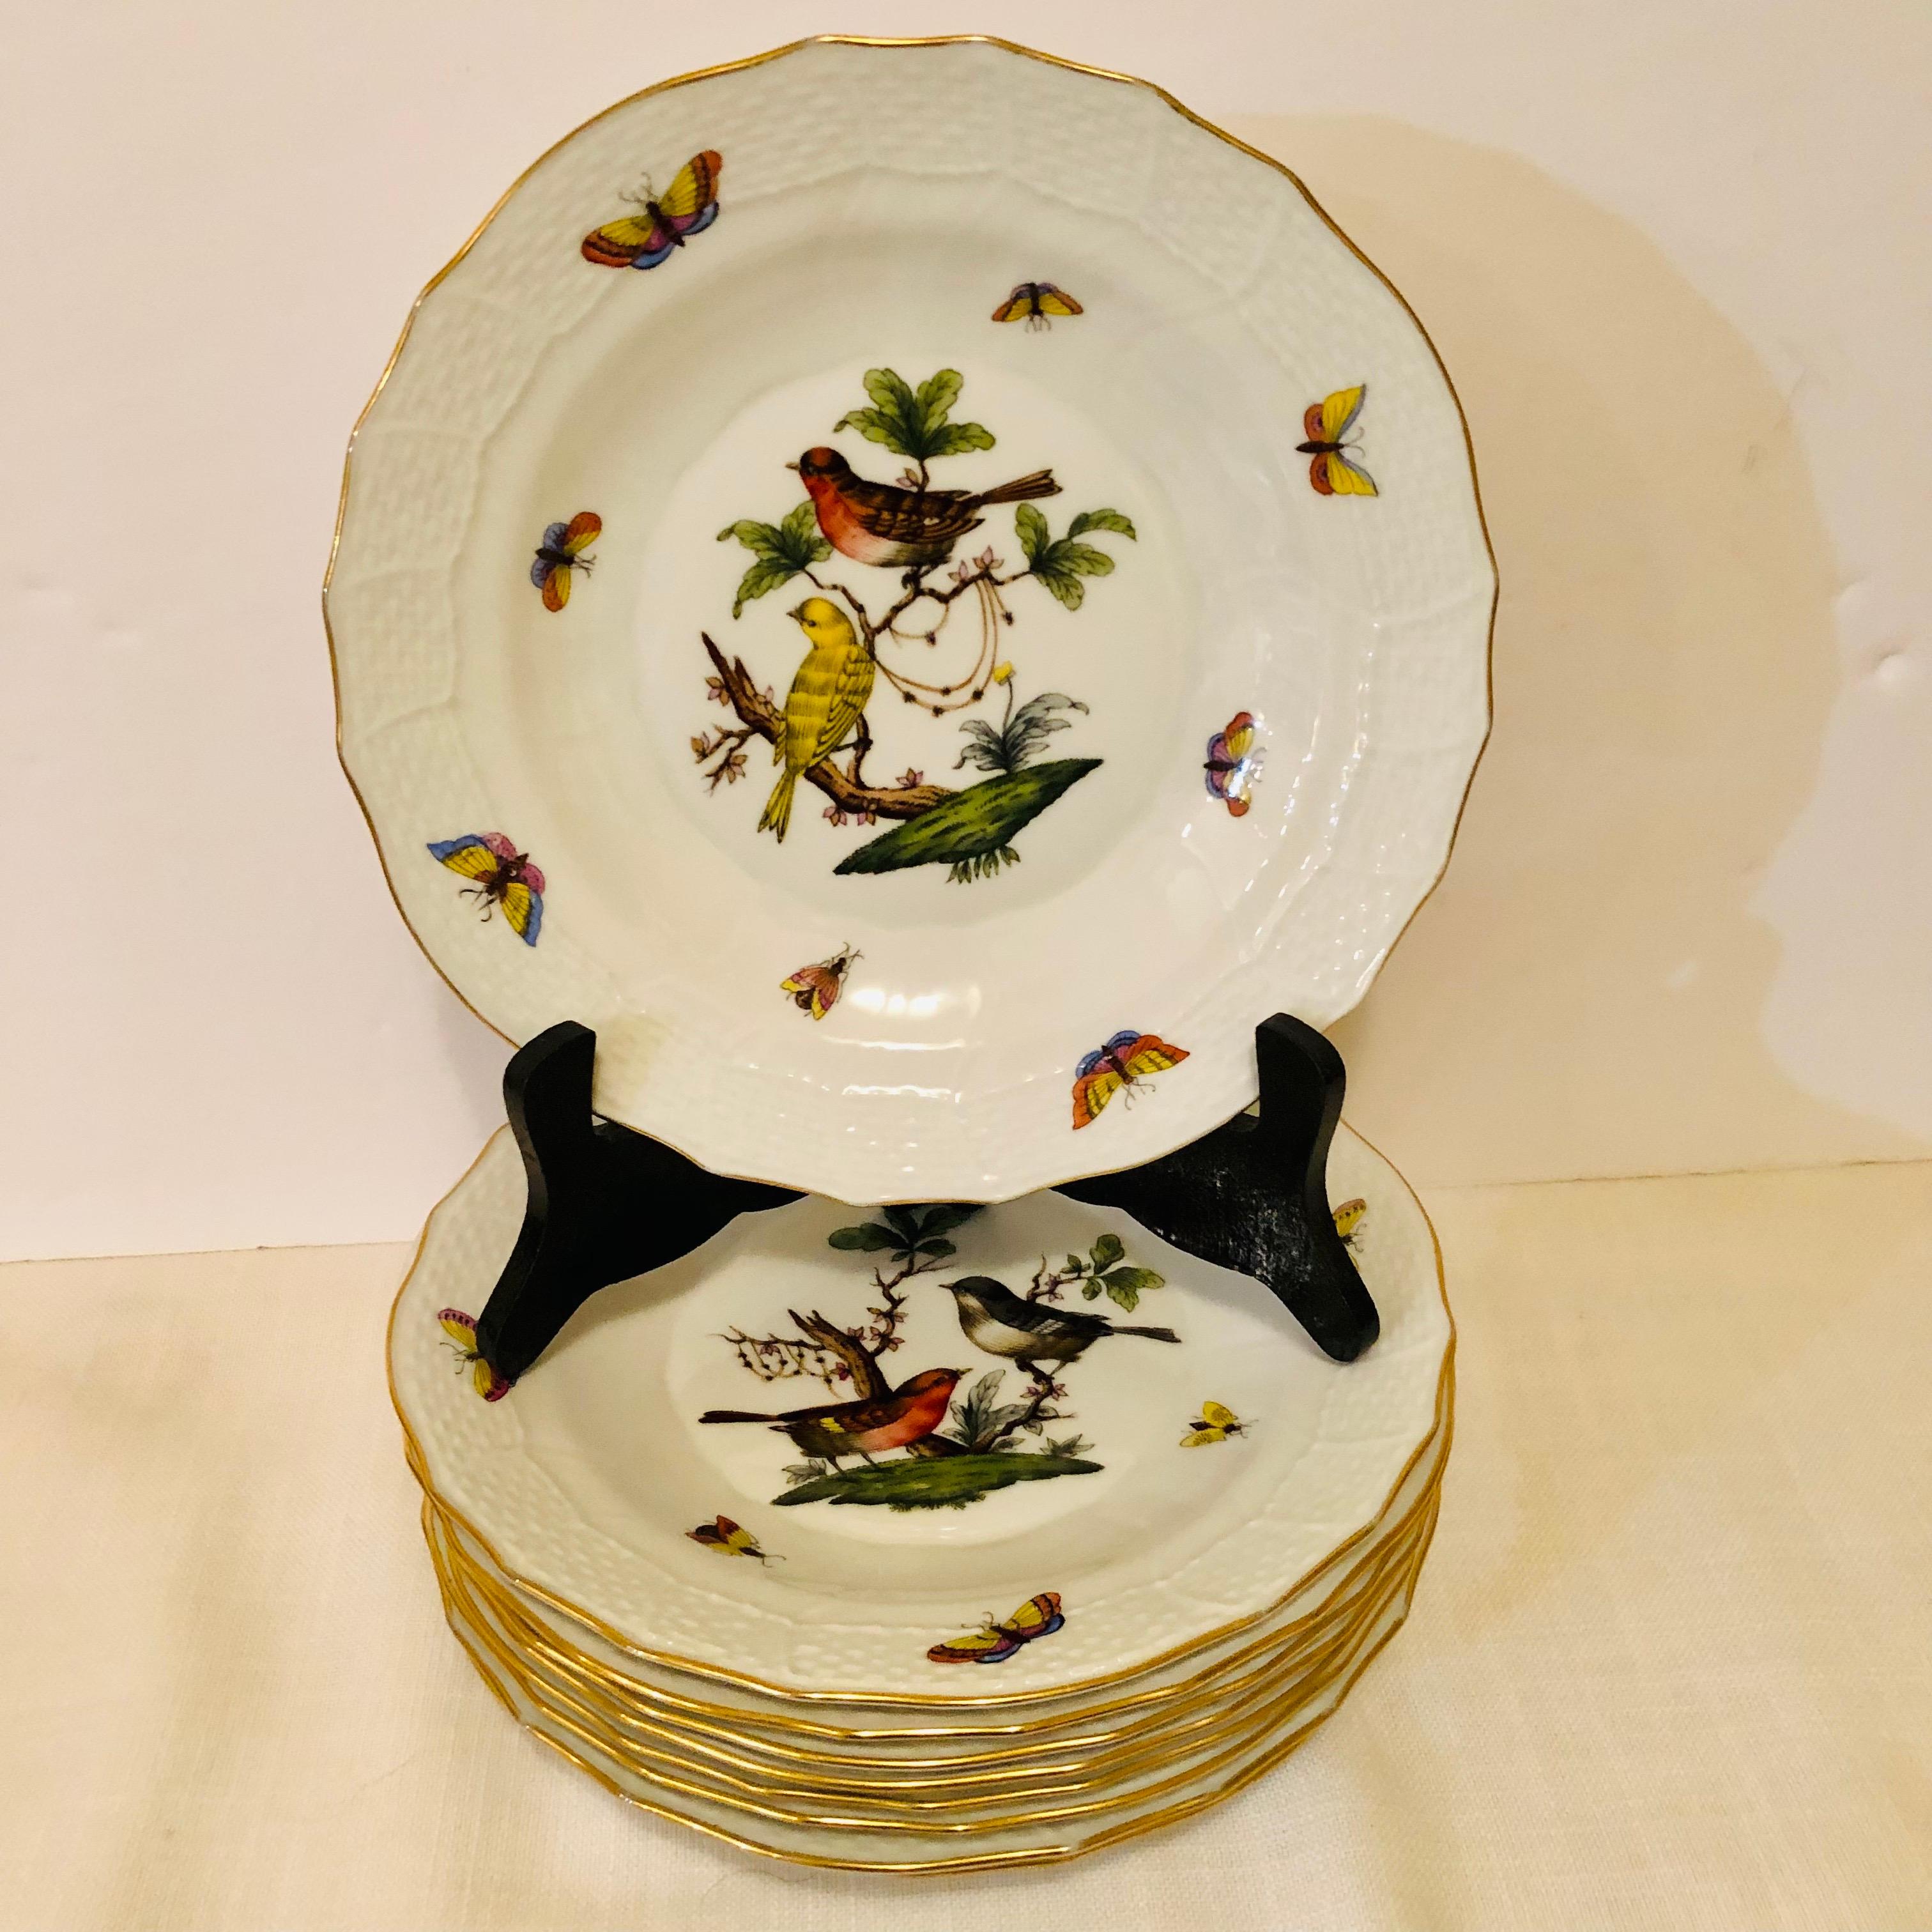 This is a lovely set of nine Herend Rothschild Bird dessert plates, each painted with two birds and decorated with accents of butterflies and flowers on a white ground. These would make a lovely naturalistic addition to any dessert service. The